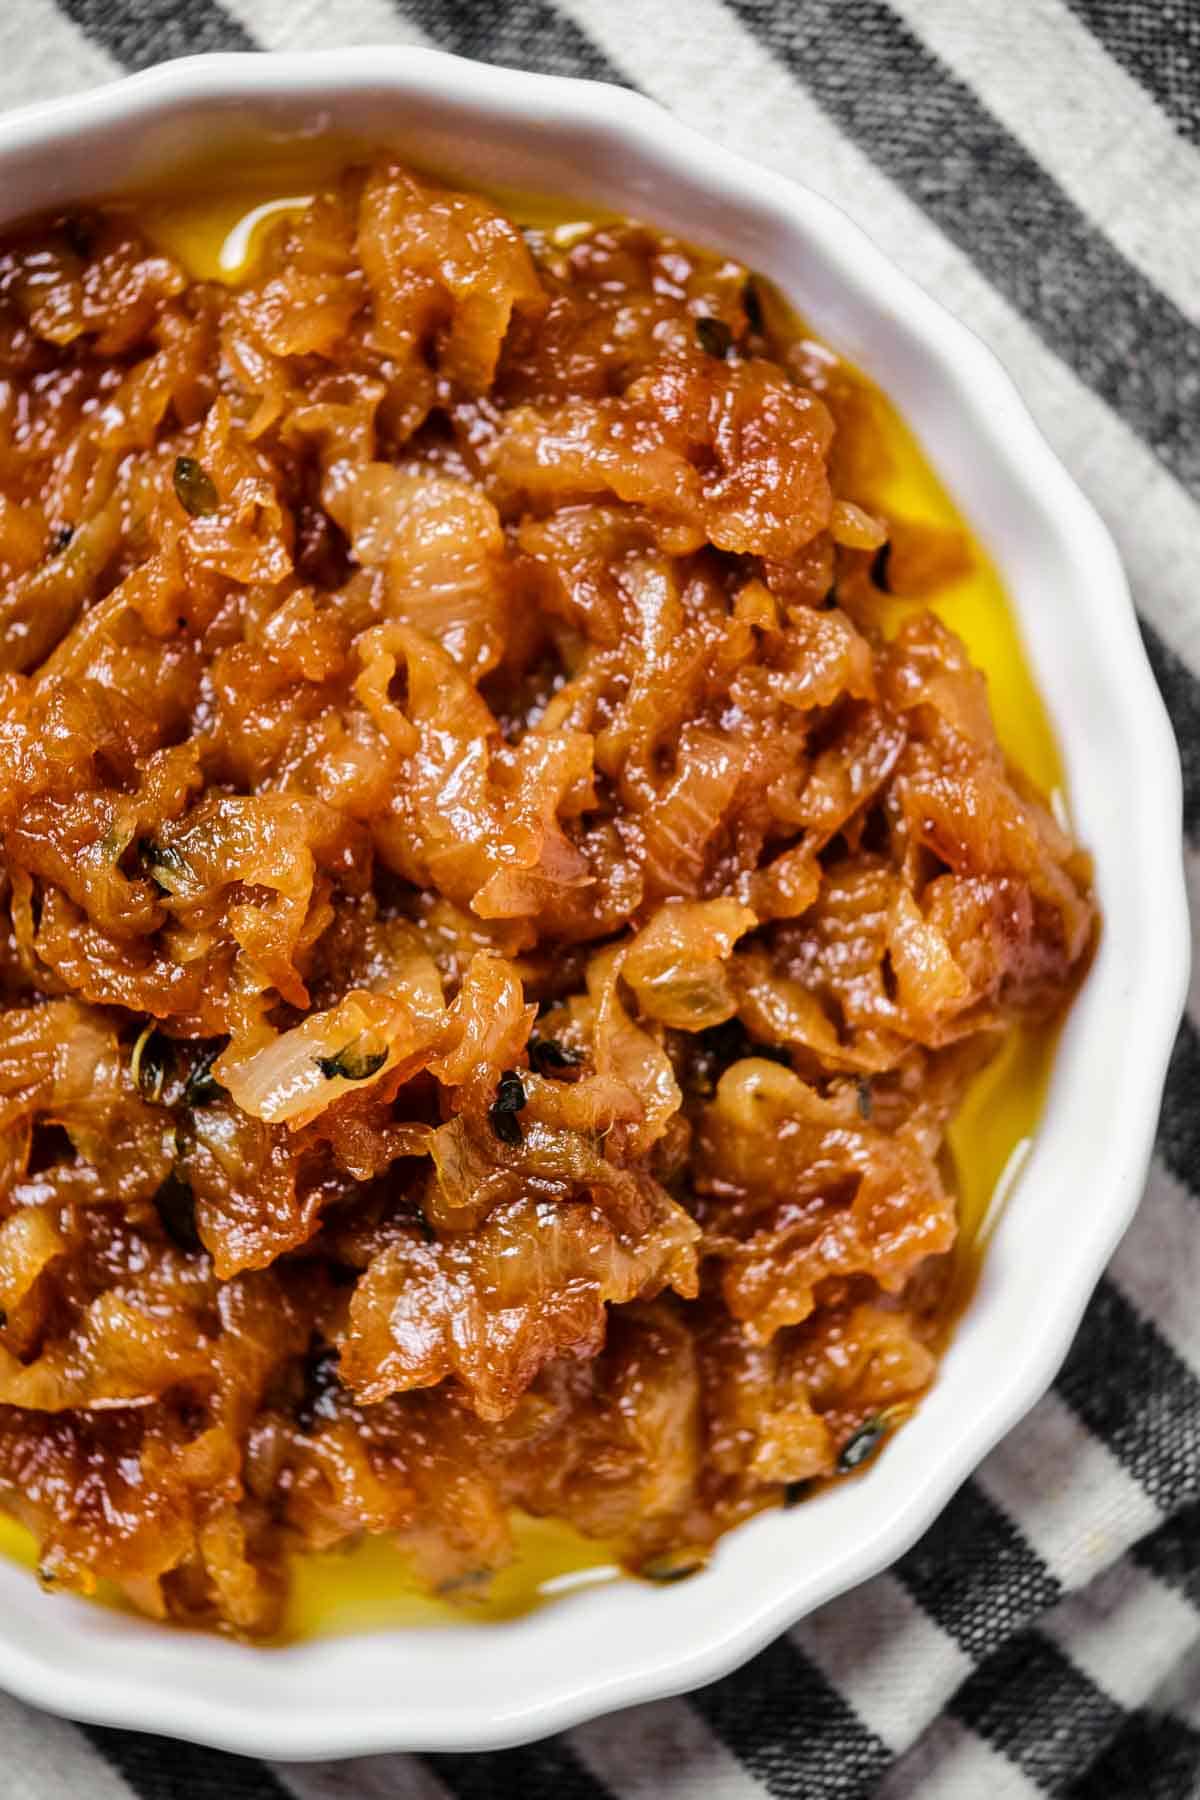 A shallow dish of deeply caramelized onions.